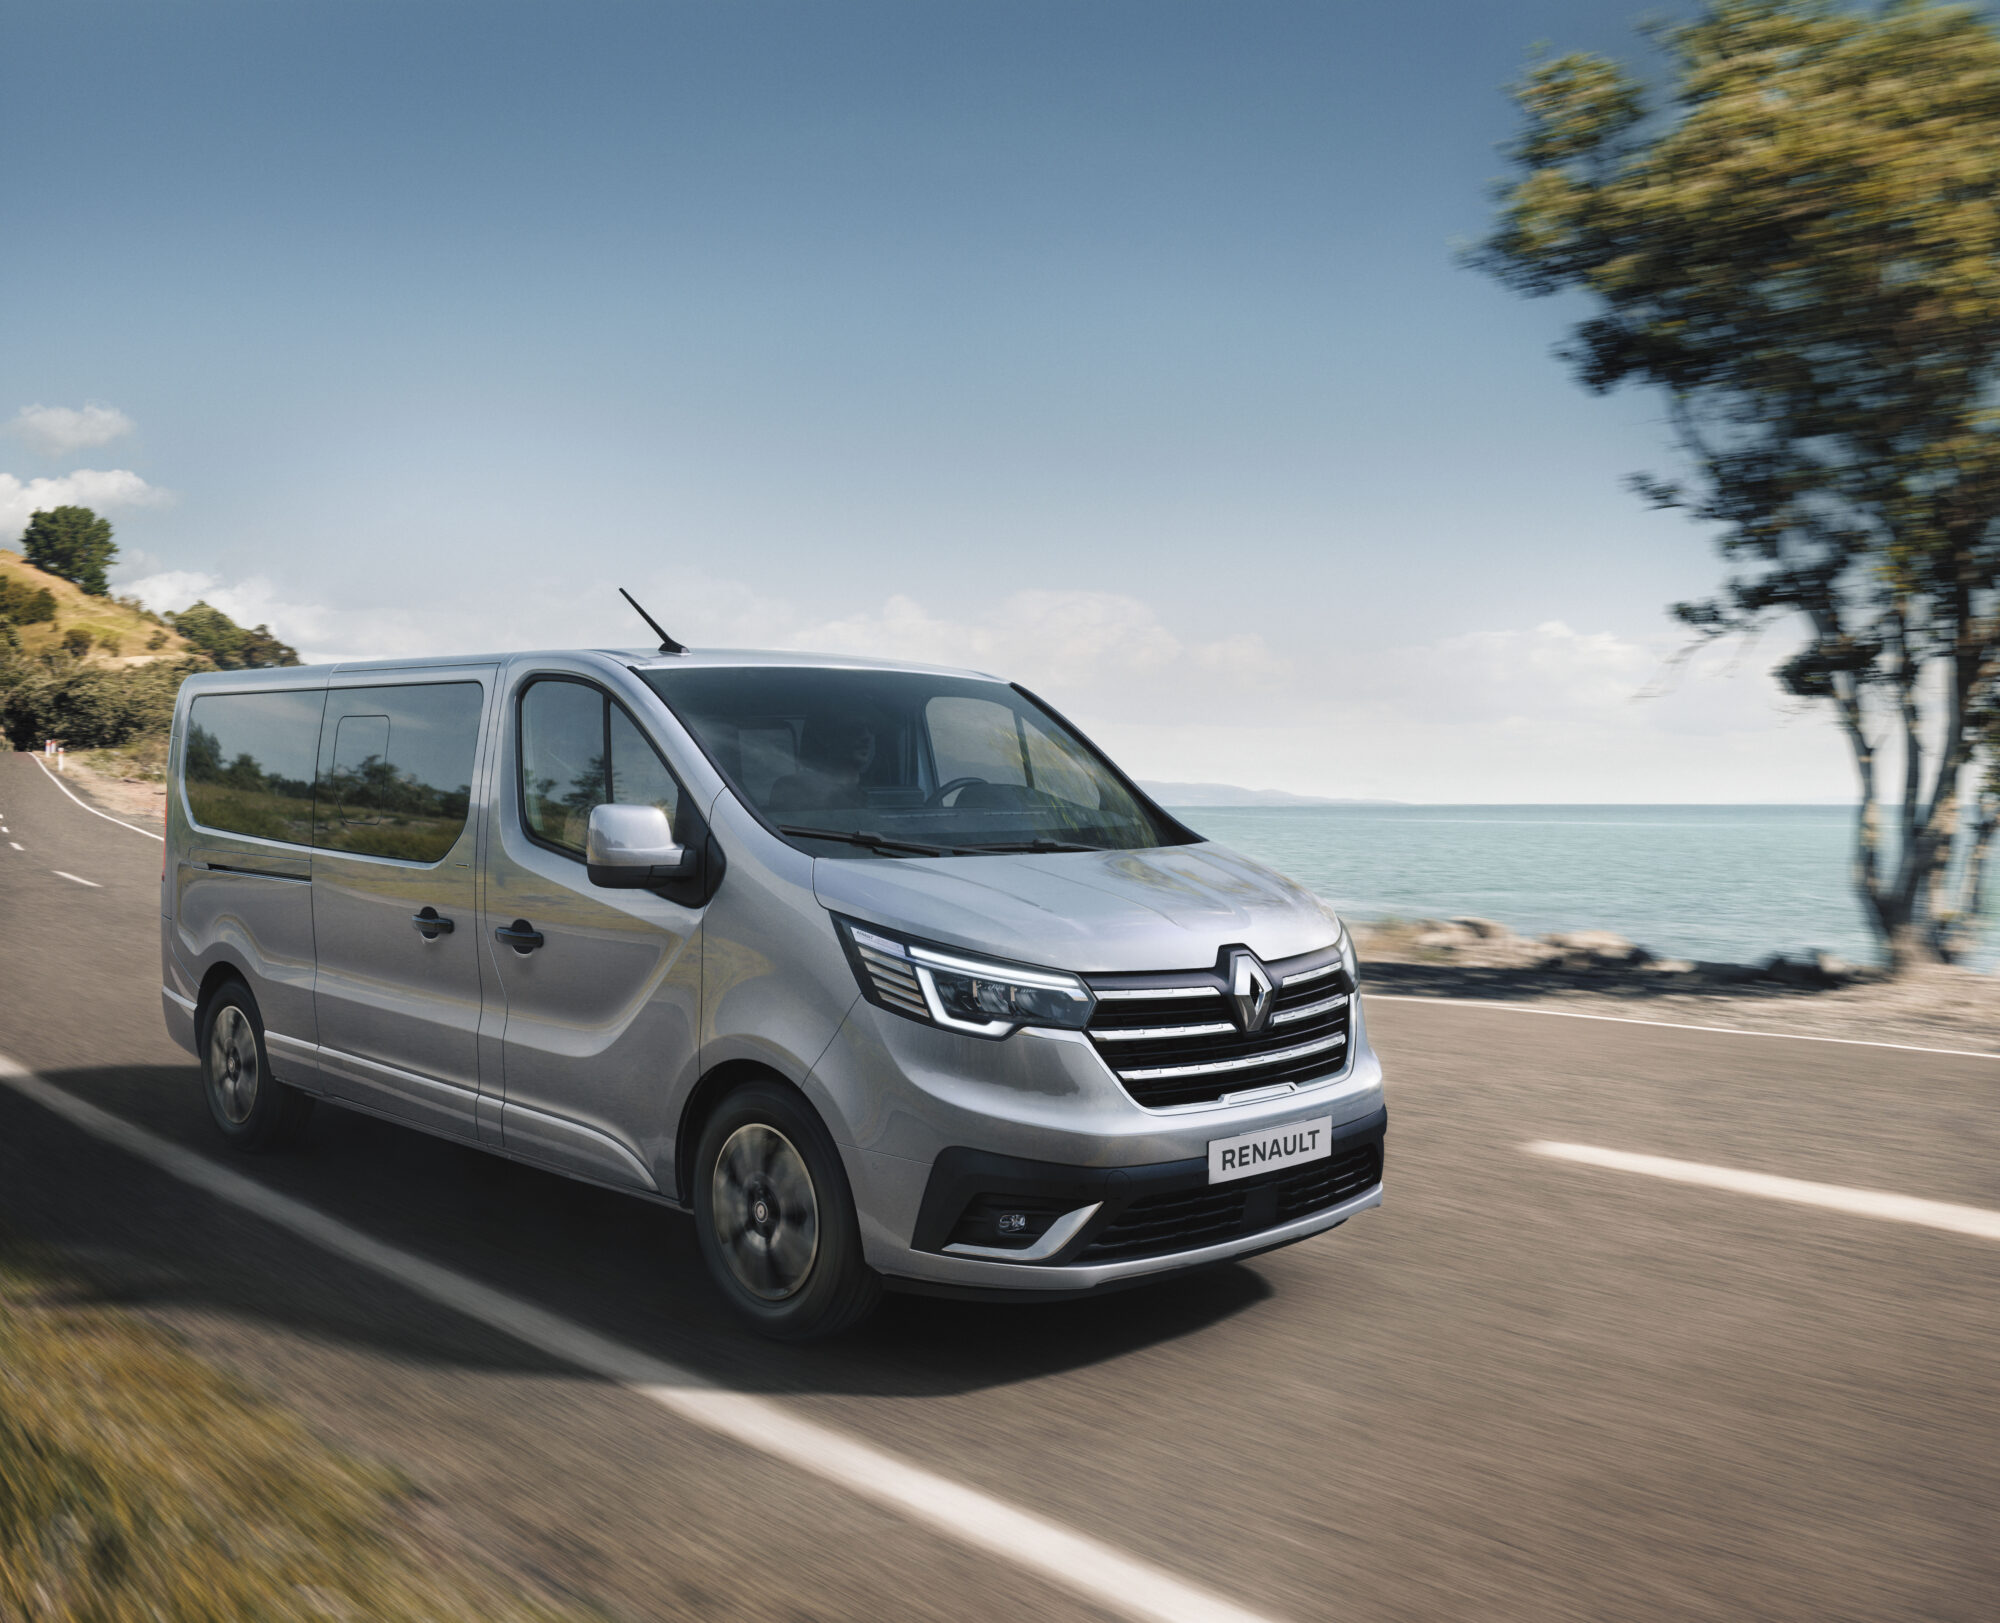 2021 - New Renault Trafic Spaceclass on location